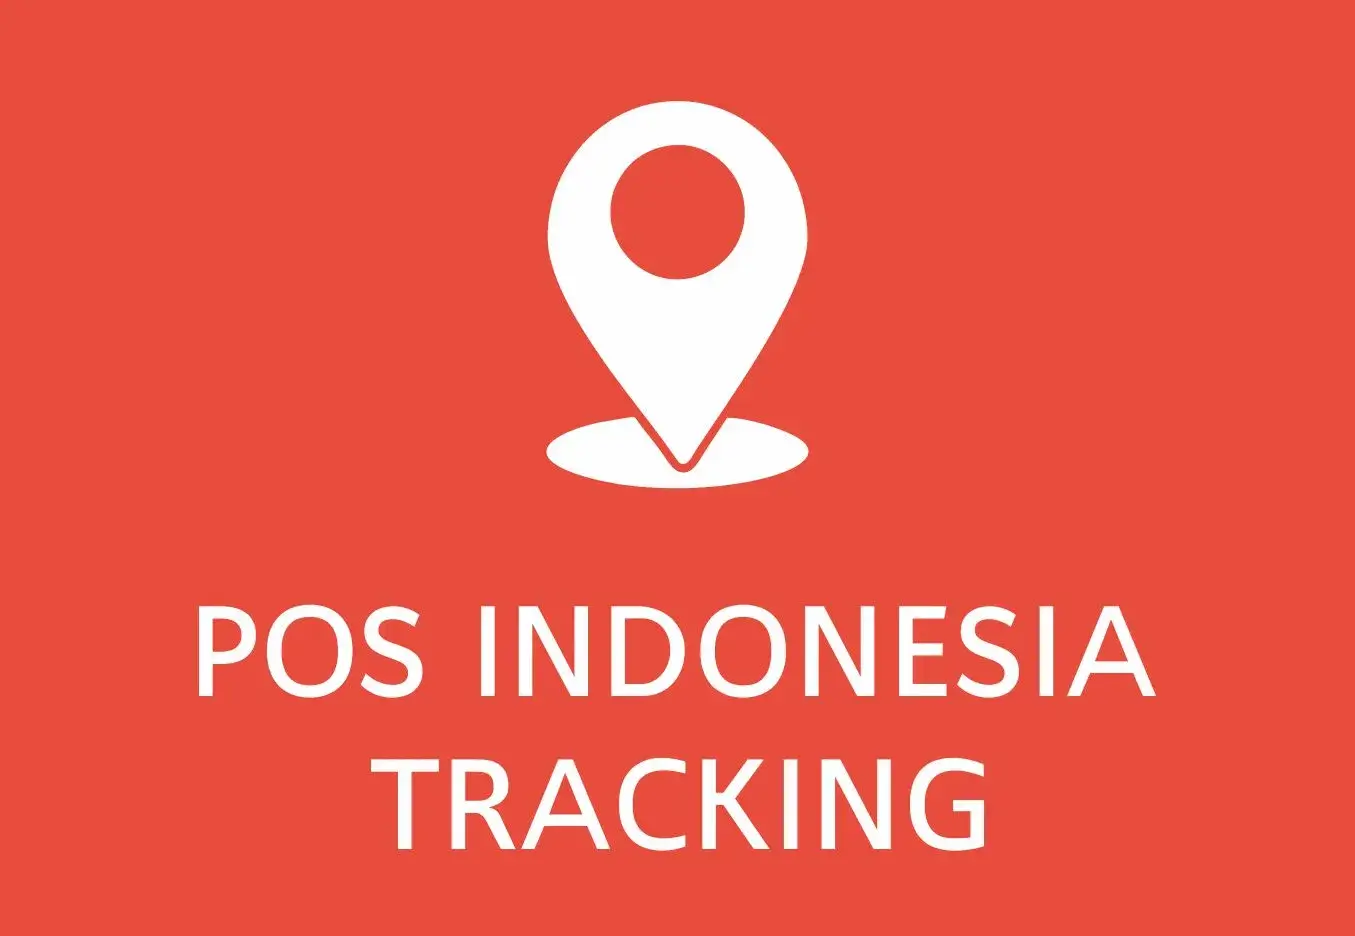 Pos Indonesia Tracking Indonesia Post